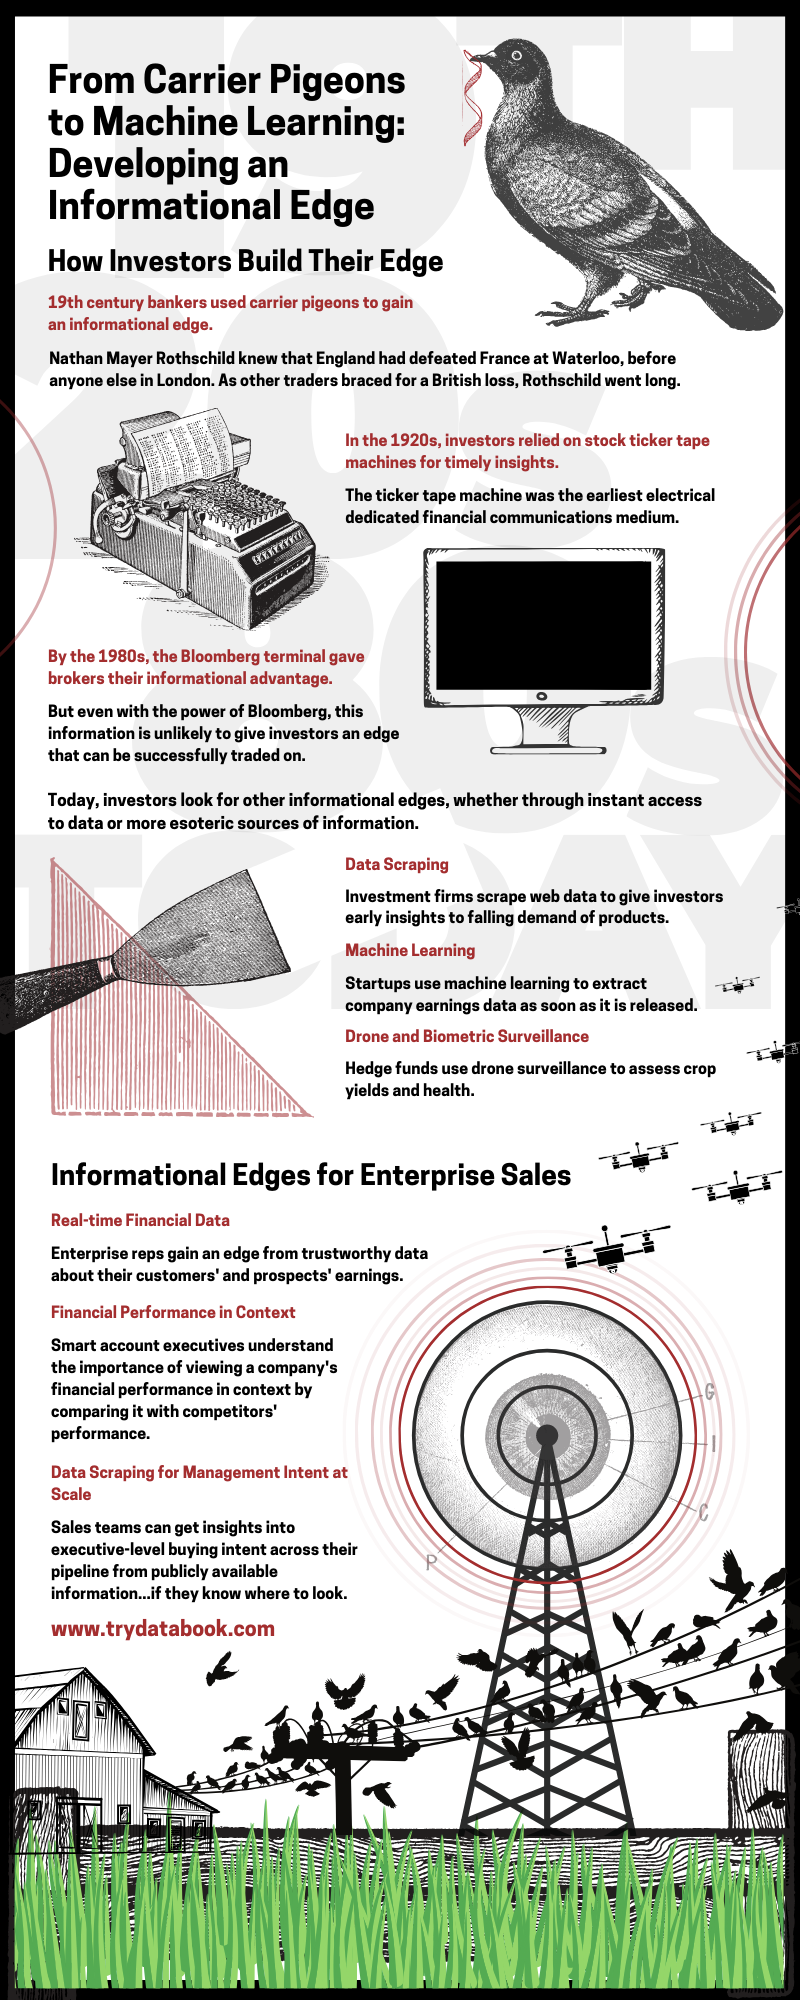 From Carrier Pigeons to Machine Learning Infographic